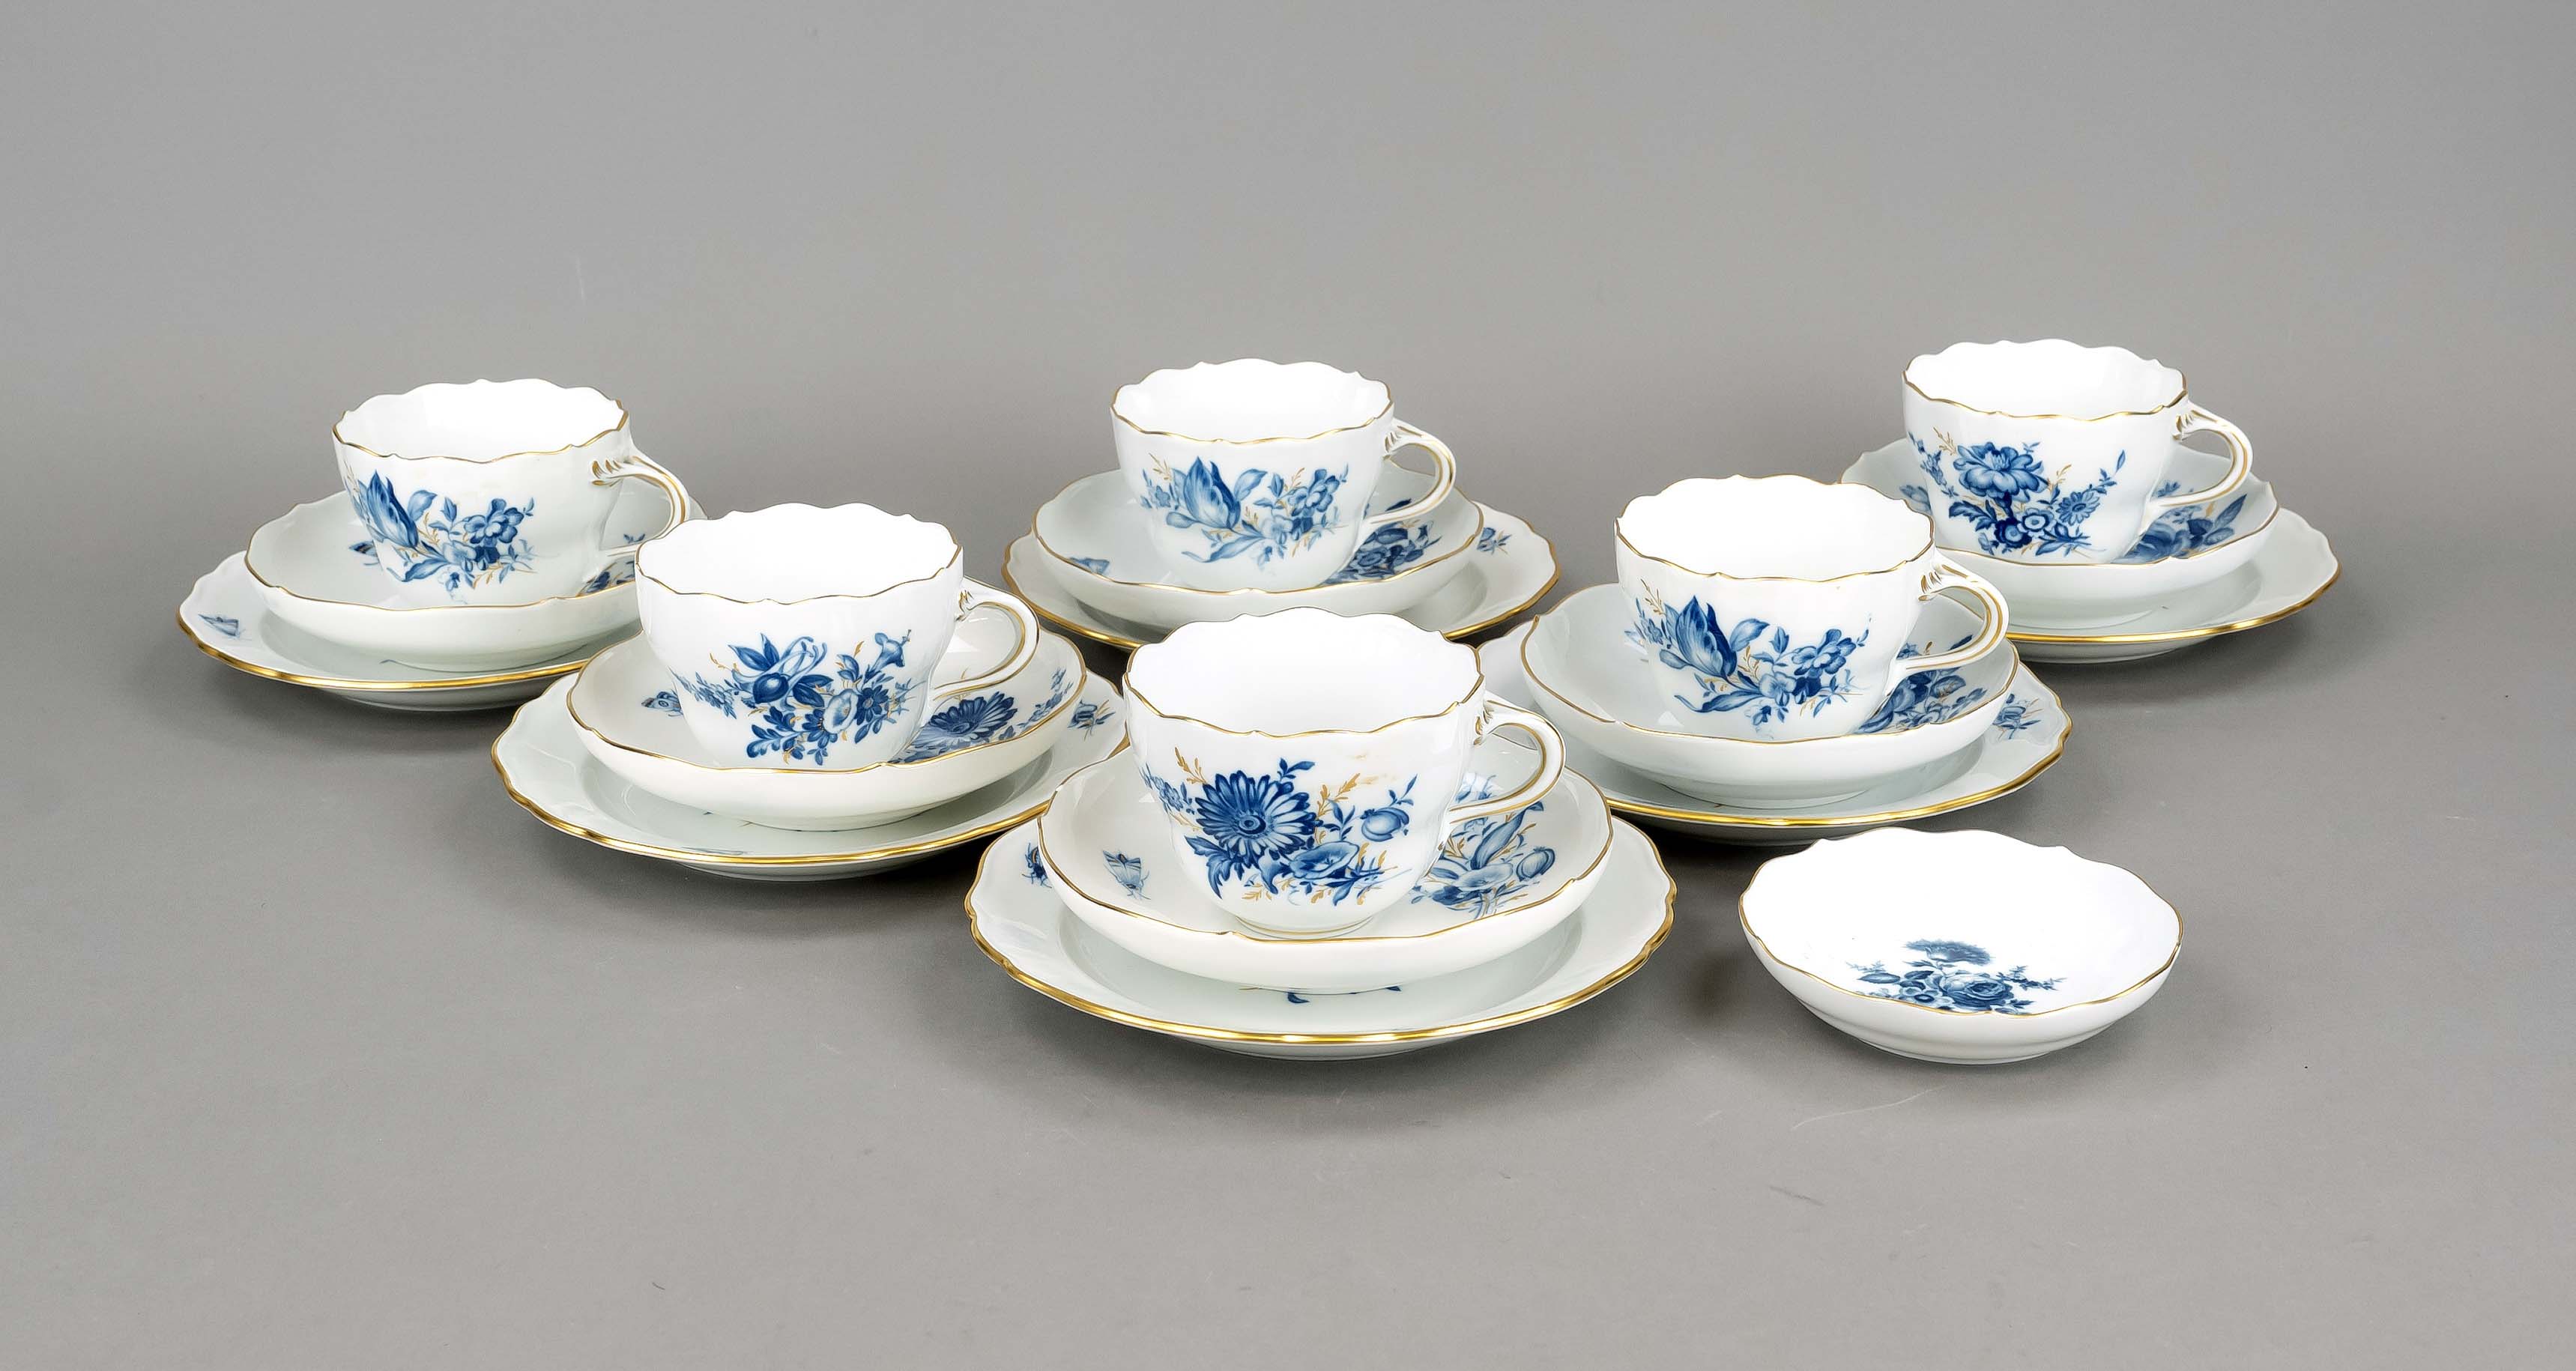 Six coffee sets and small decorative bowl, 19 pieces, Meissen, marks after 1934, 1st and 2nd choice,